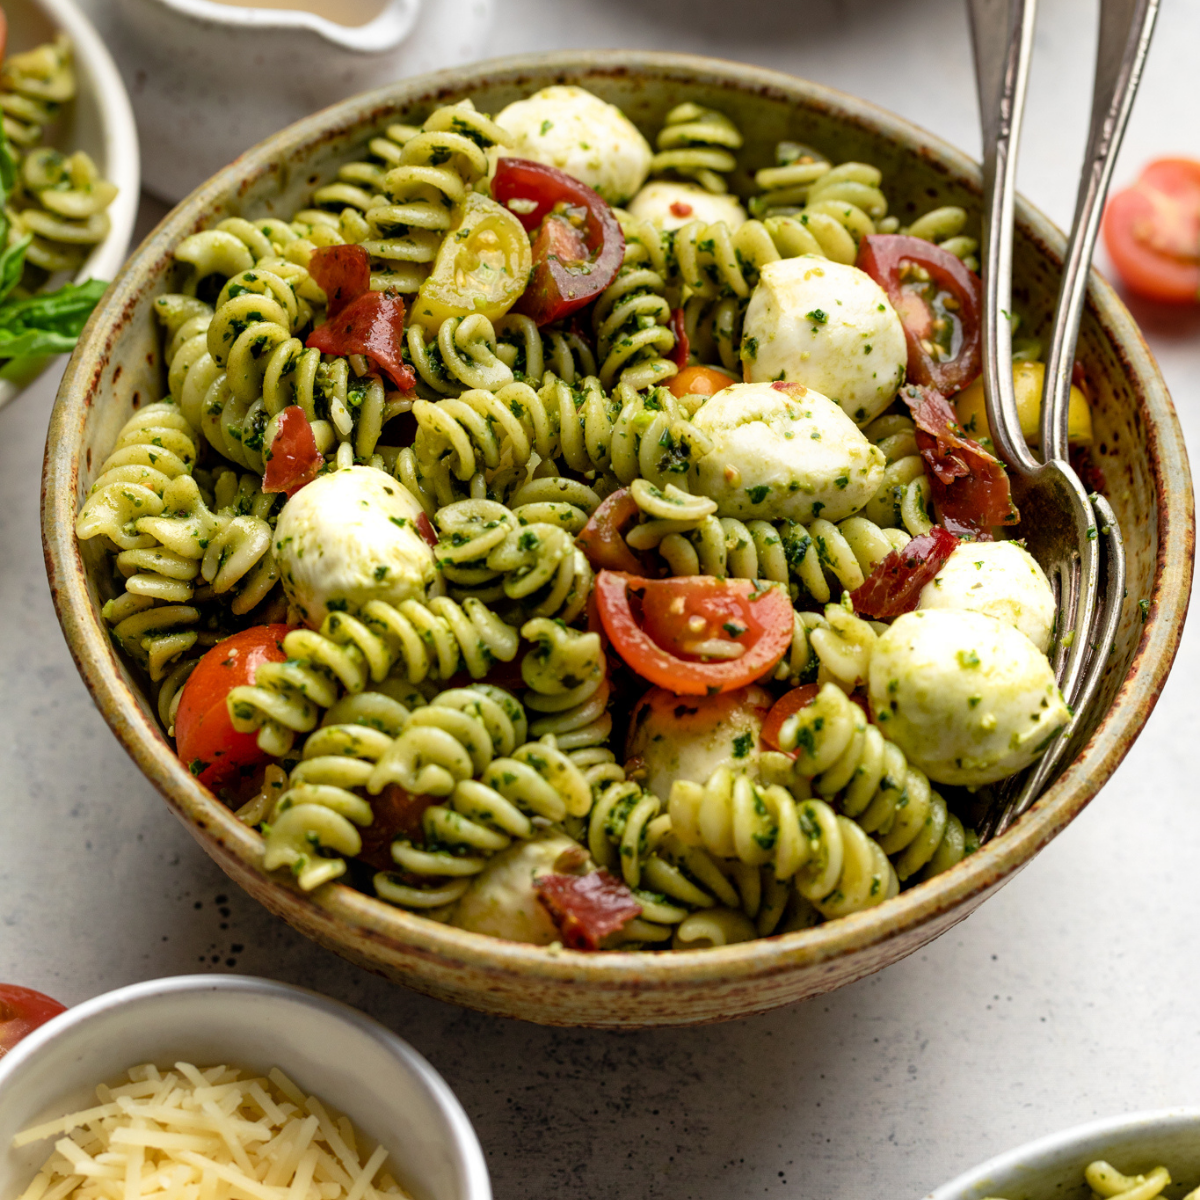 Pasta salad in a brown bowl with two serving spoons tucked into the side.